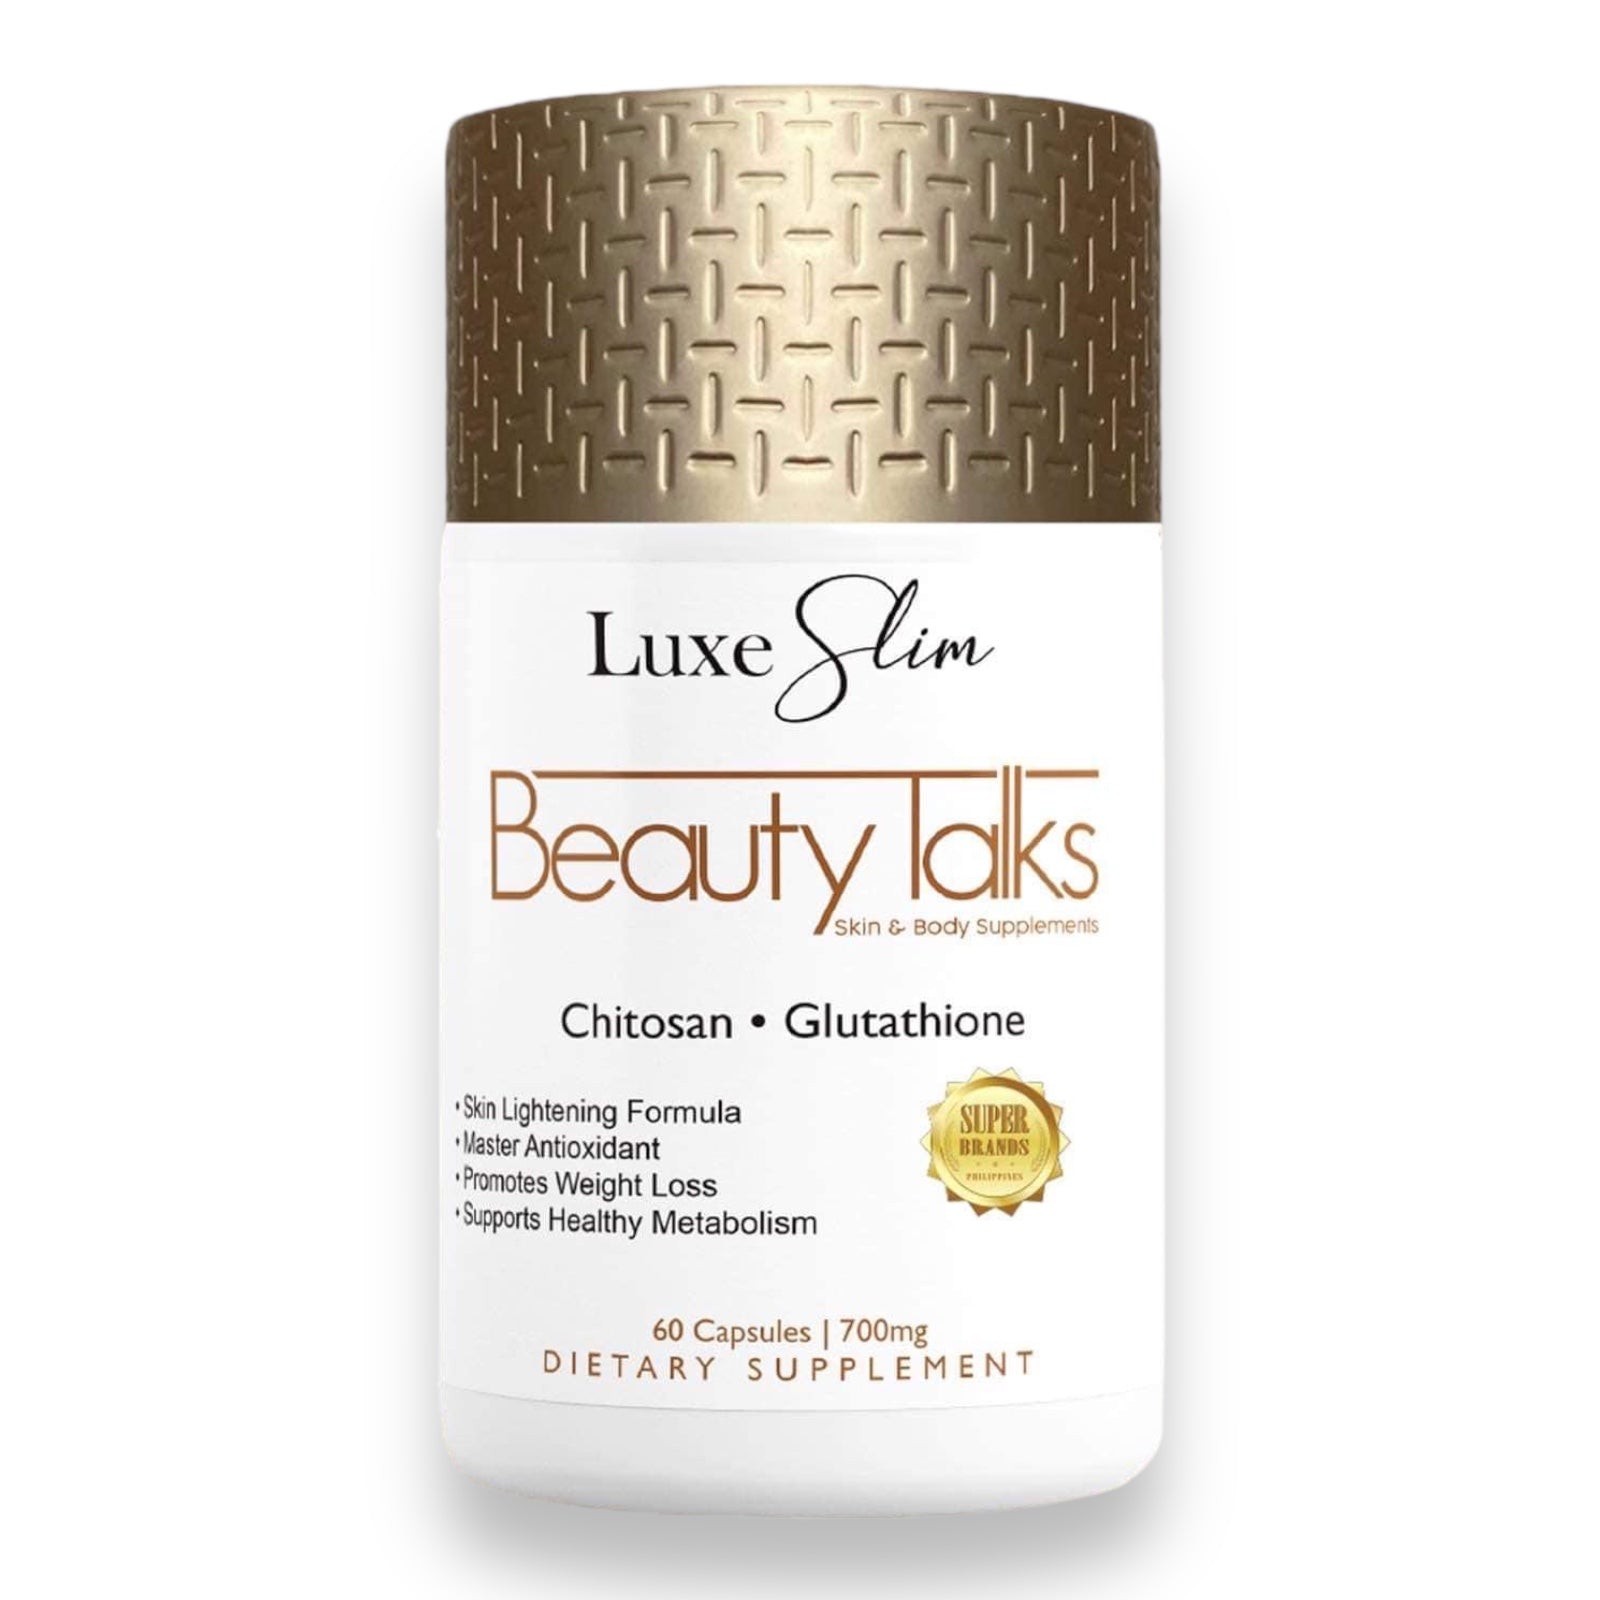 Luxe Slim - Beauty Talks Skin and Body Supplements - Chitosan Glutathione 60 Capsules